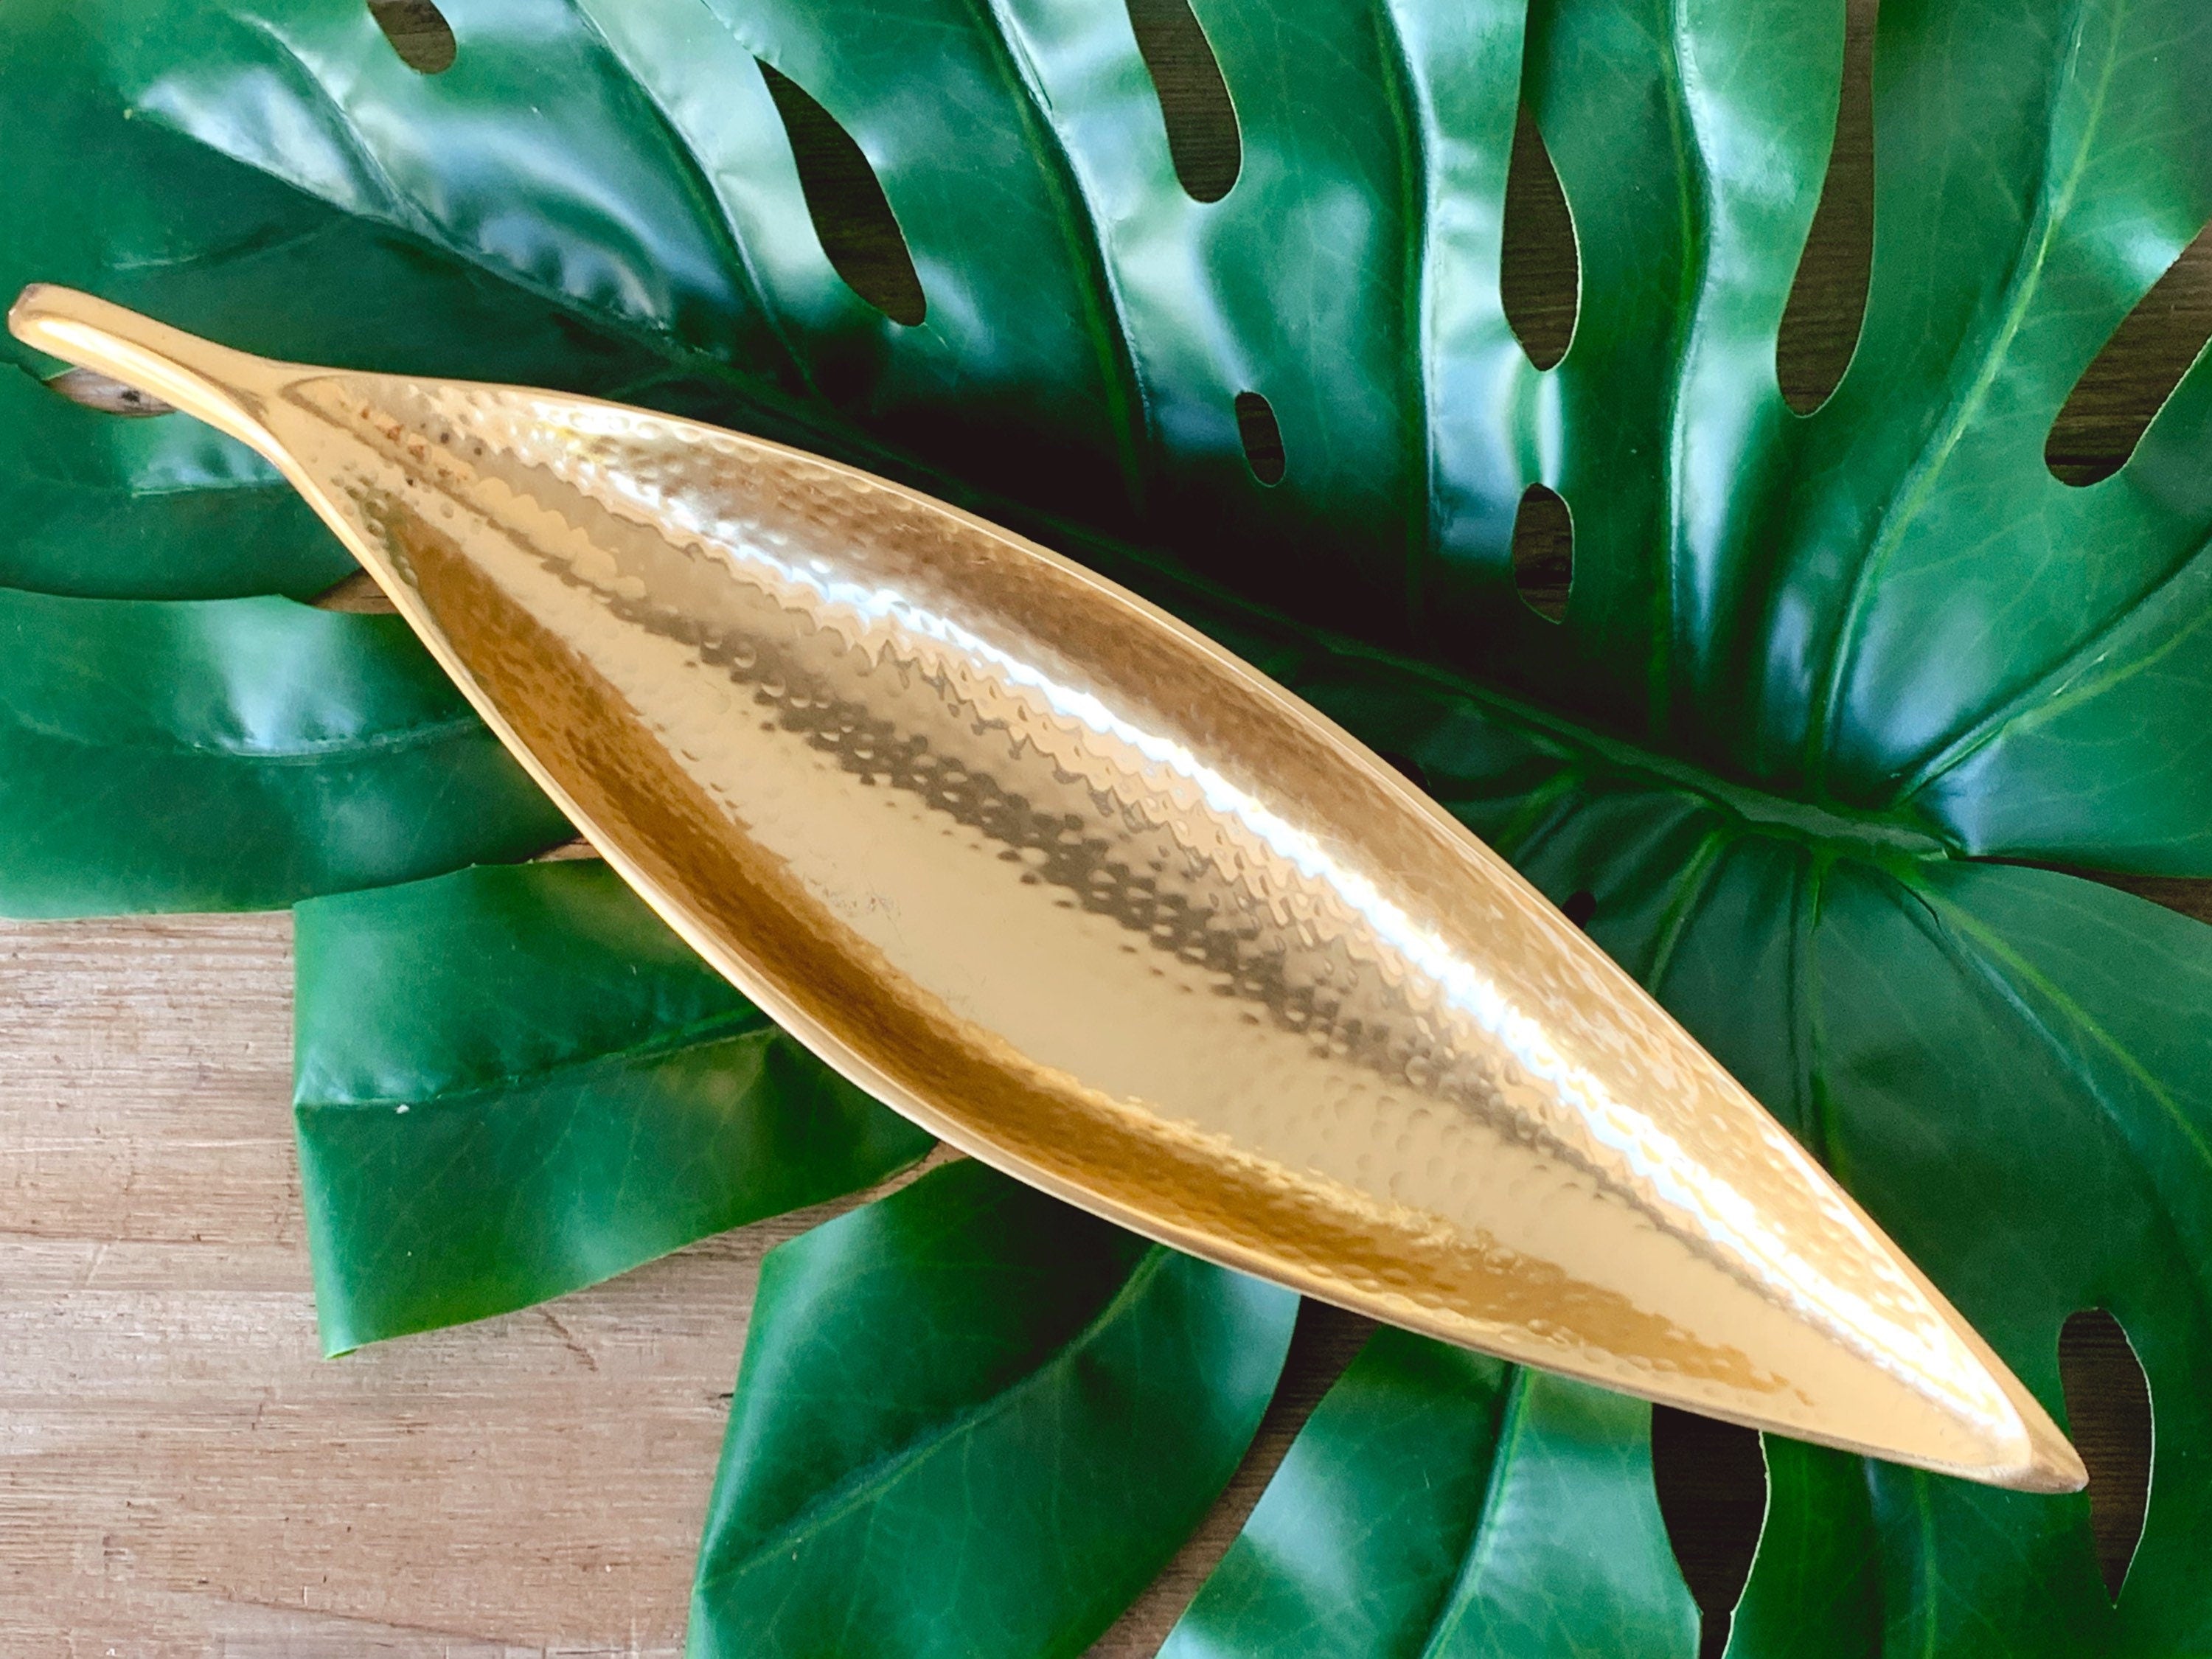 Vintage Gold Tone Slender Leaf Shaped Serving Tray | Hammered Metal Serveware, Jewelry Dish, Trinket Tray, Catchall Plate